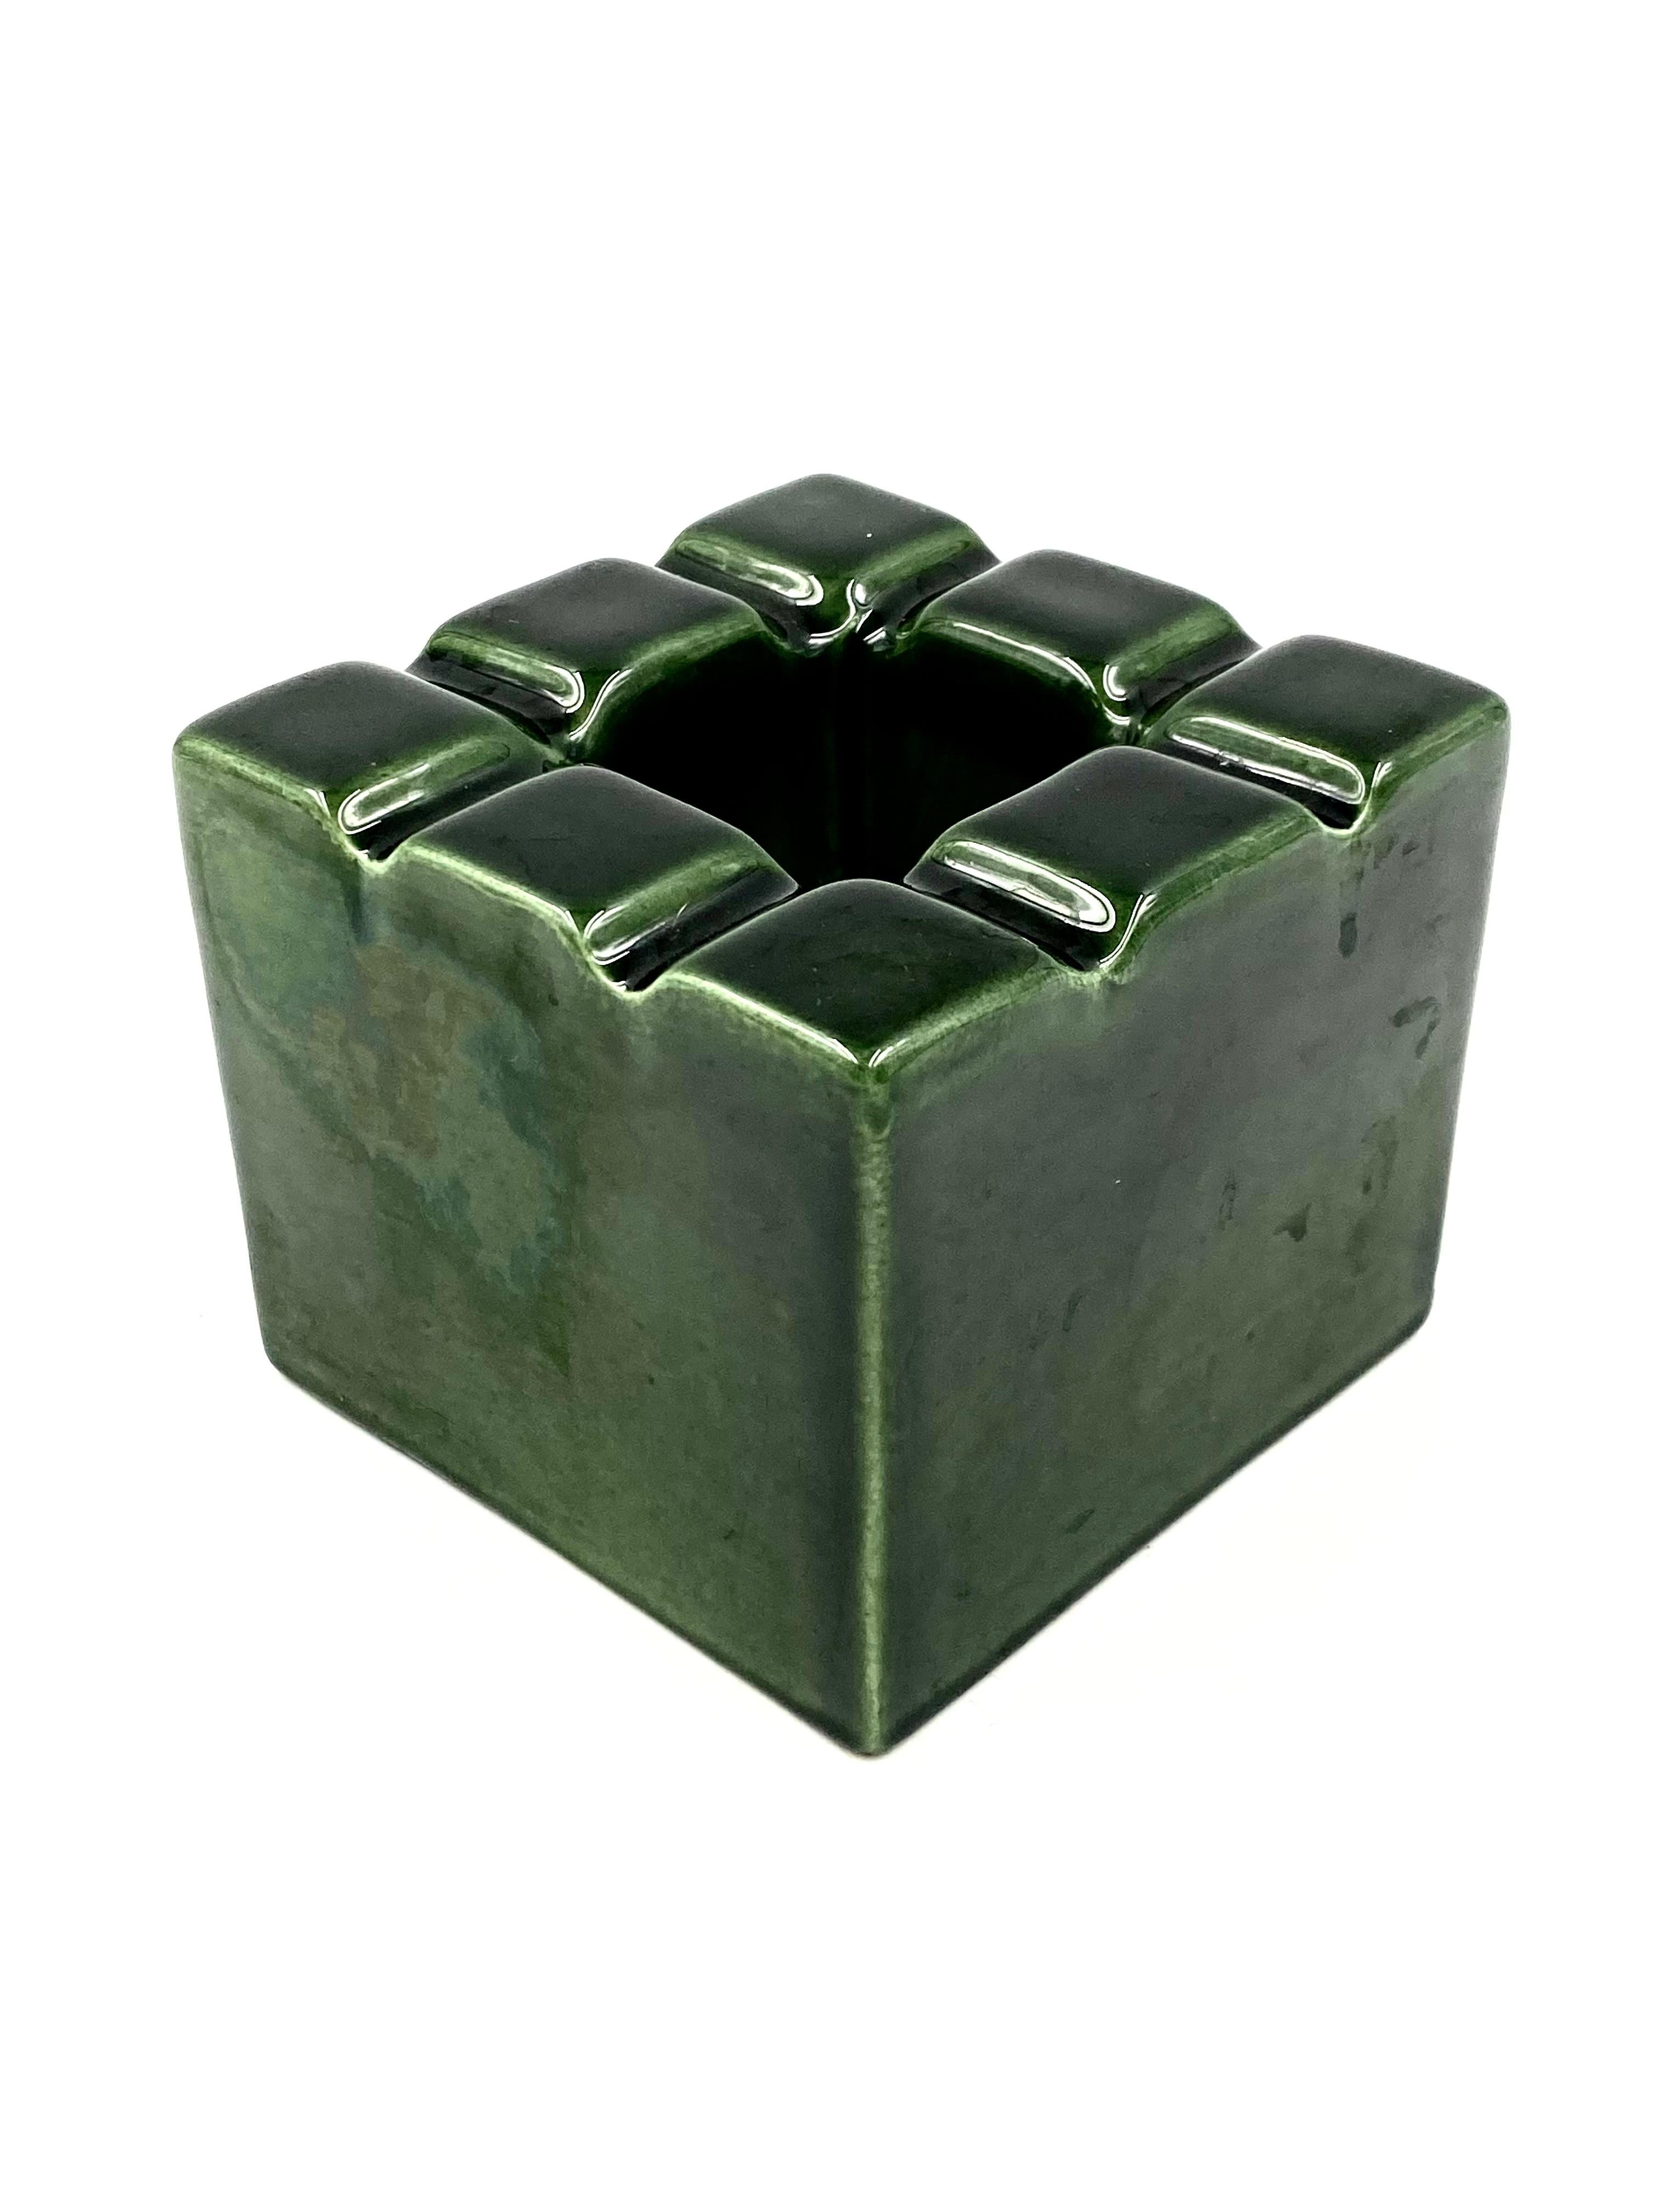 Space Age Green Cubic Glazed Ceramic Ashtray, Sicart, Italy, 1970s